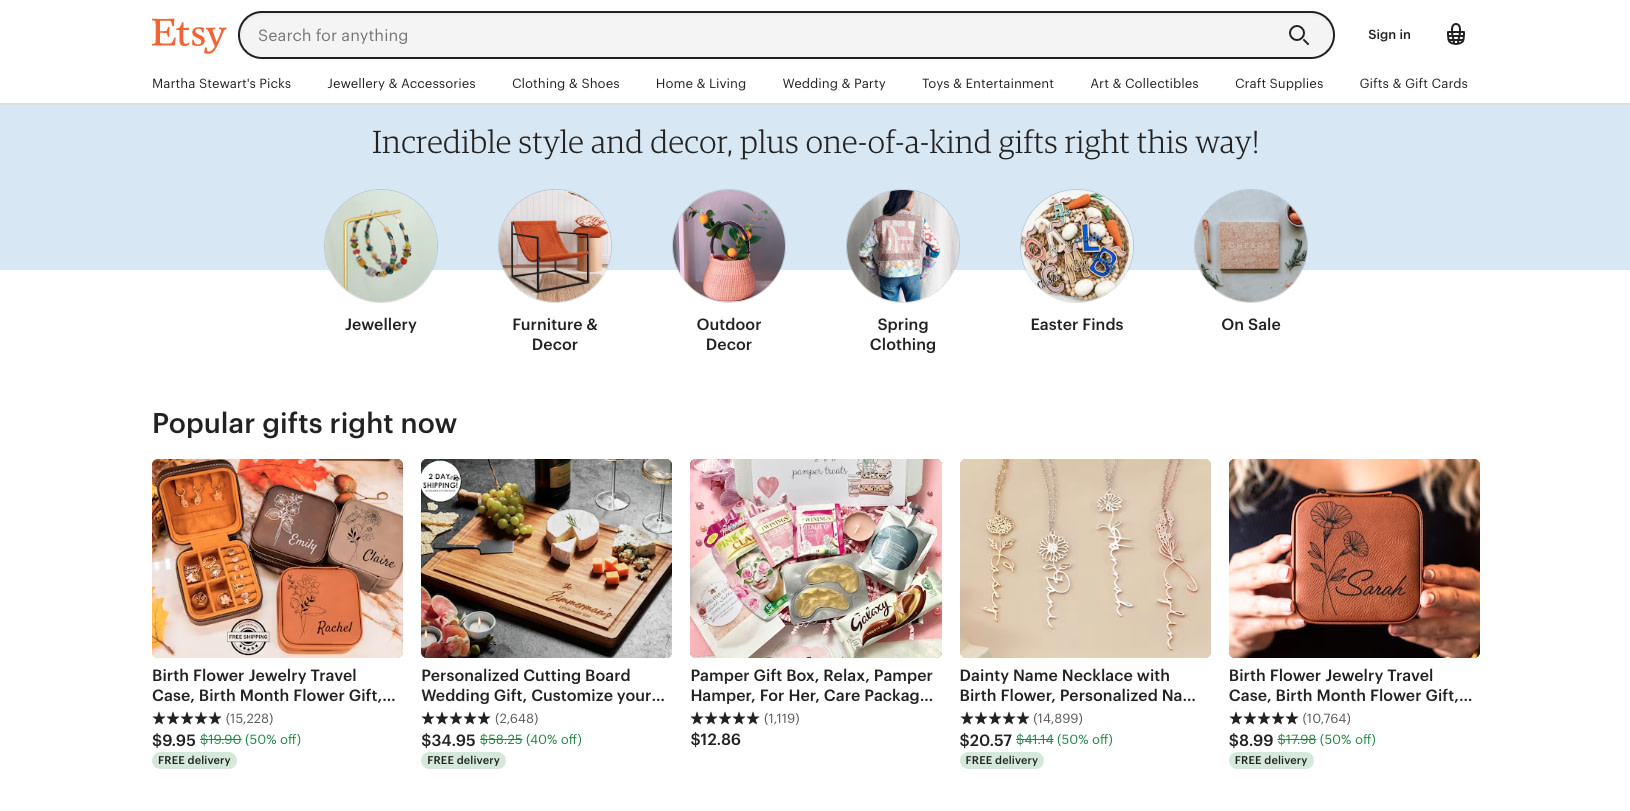 Best marketplace to sell digital items online - Etsy